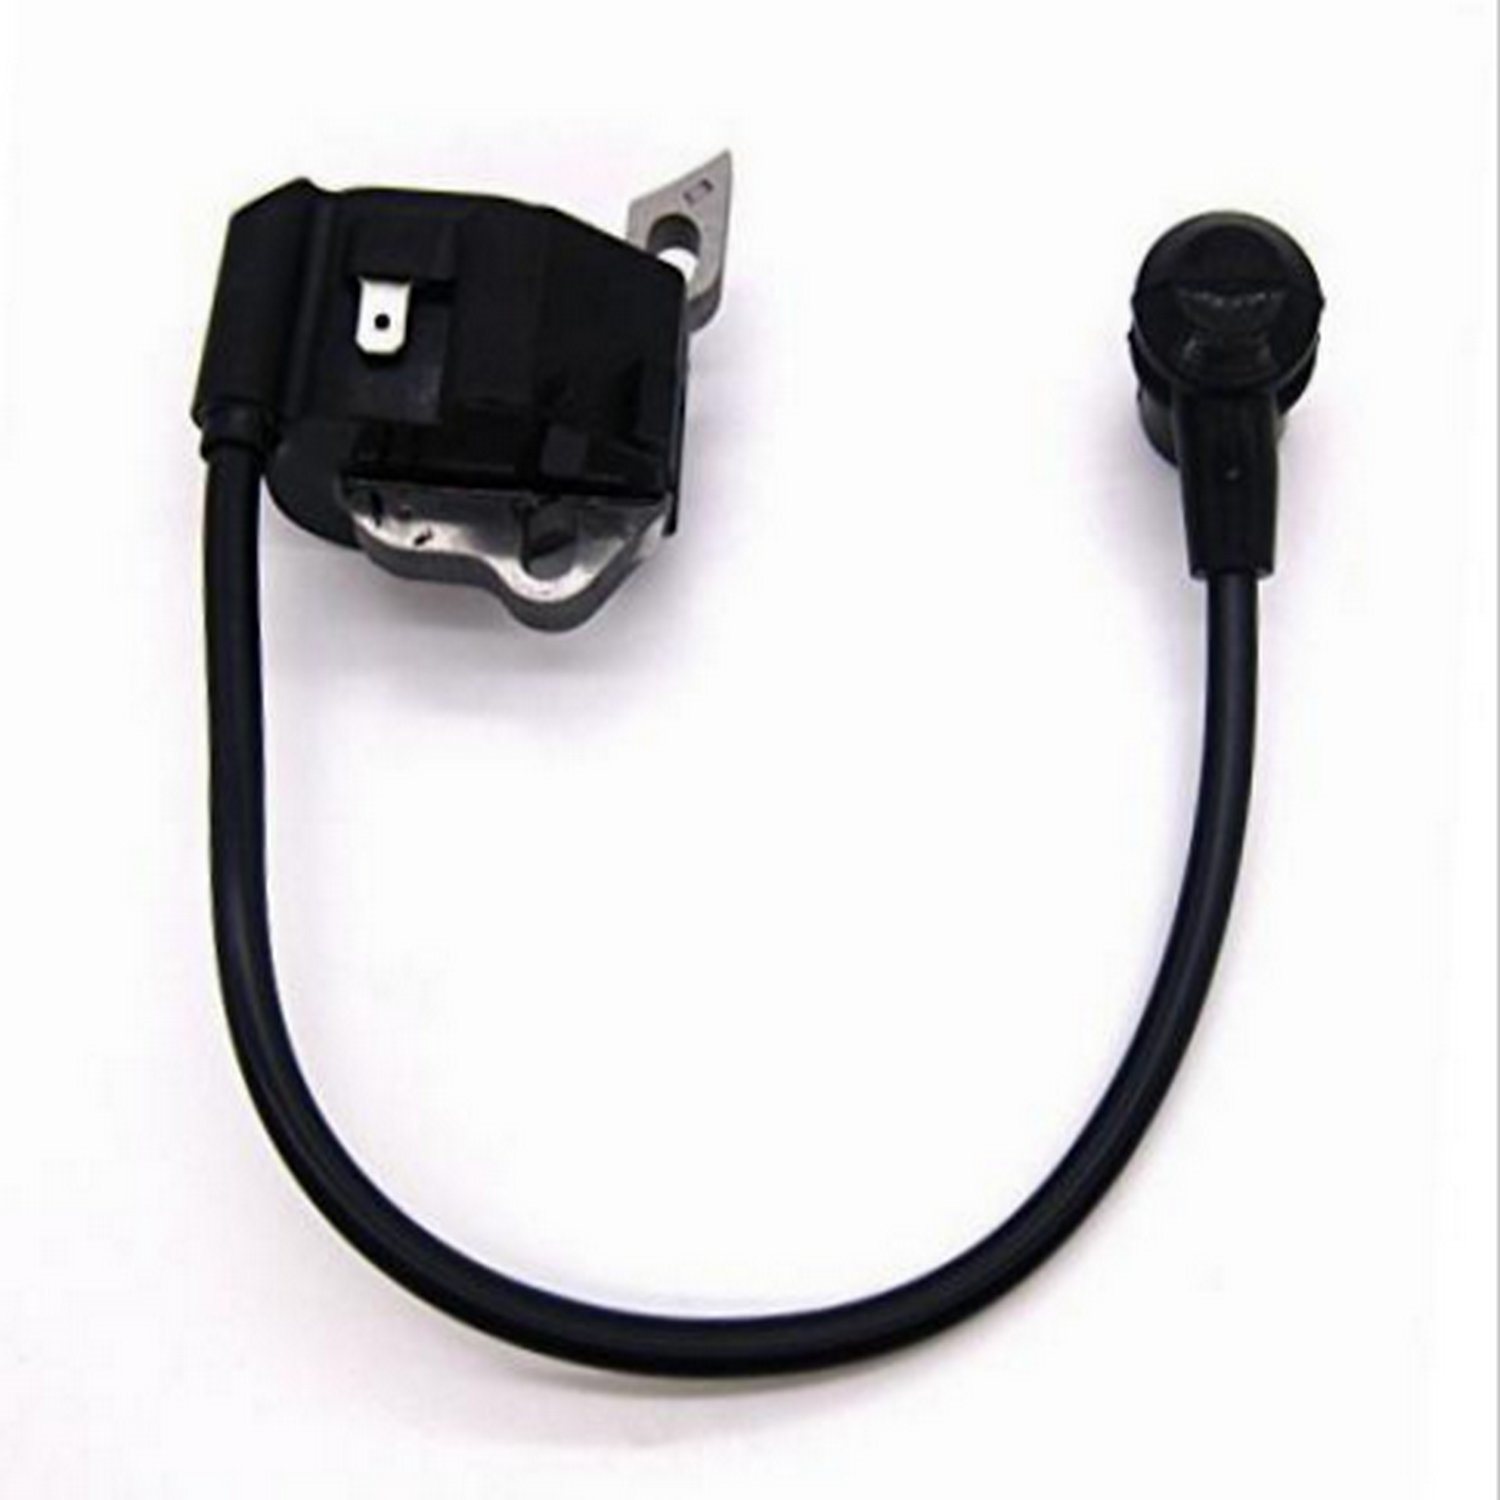 Ignition Coil for Stihl 021 023 025 Ms210 Ms230 Ms250 Chaisnaw